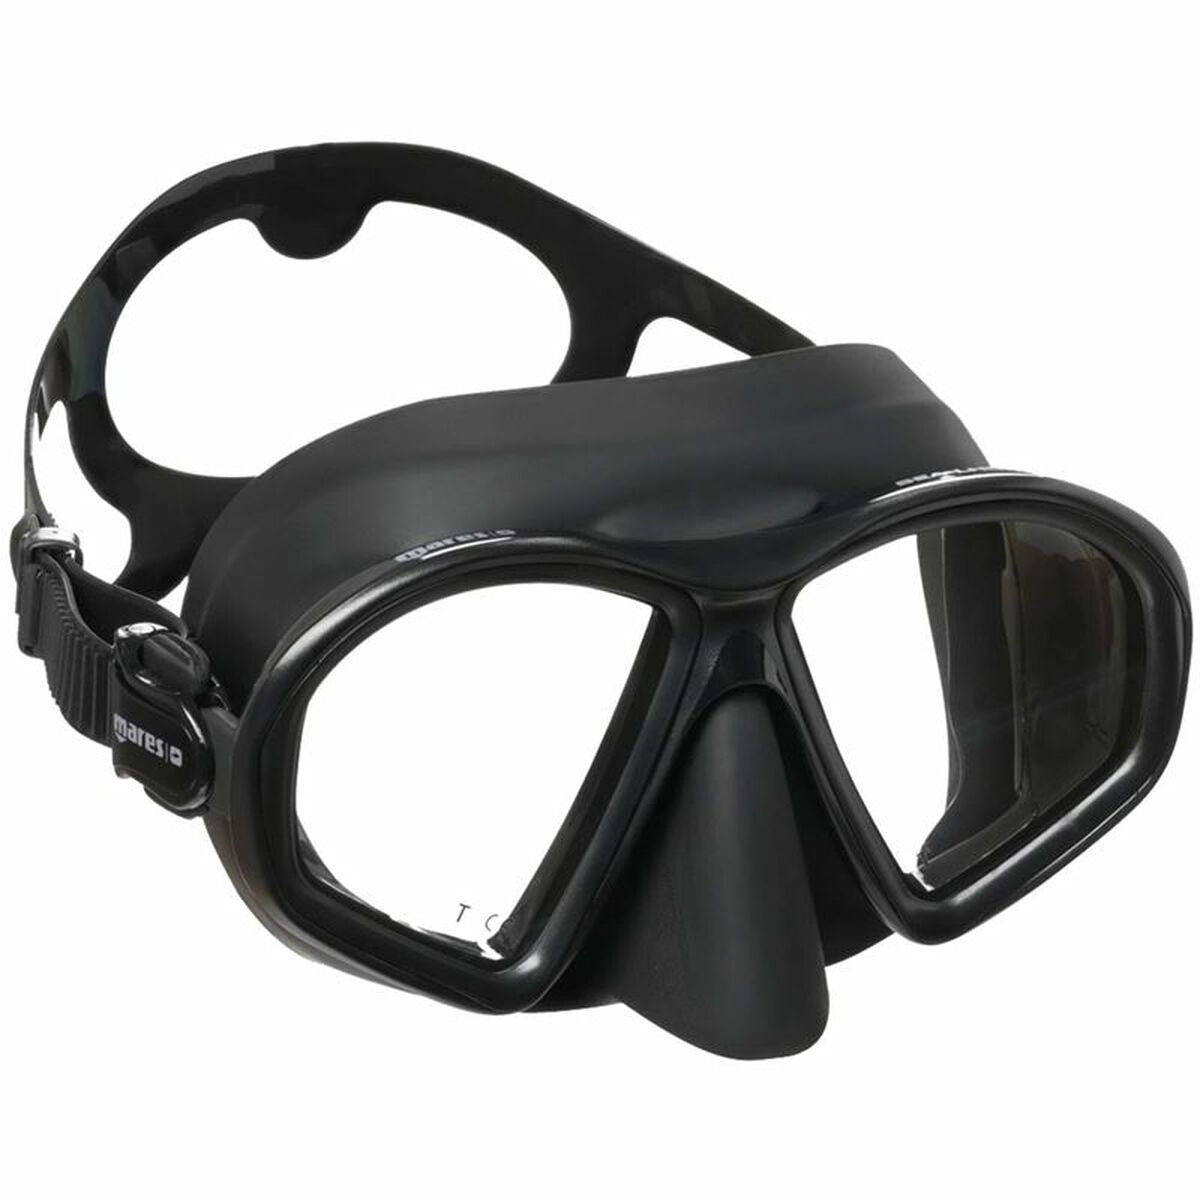 Diving mask Mares Sealhouette One size Black